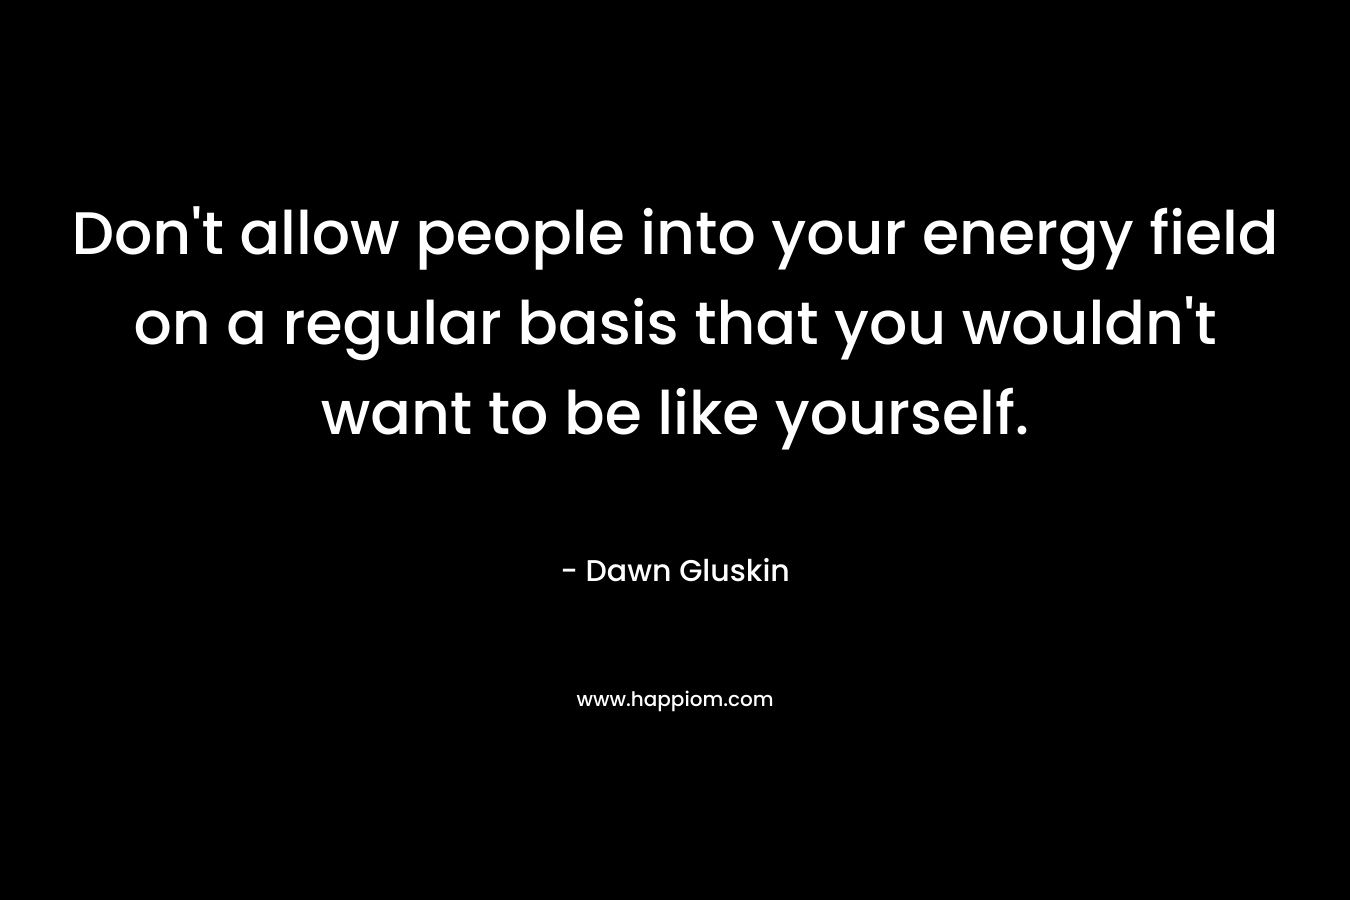 Don’t allow people into your energy field on a regular basis that you wouldn’t want to be like yourself. – Dawn Gluskin